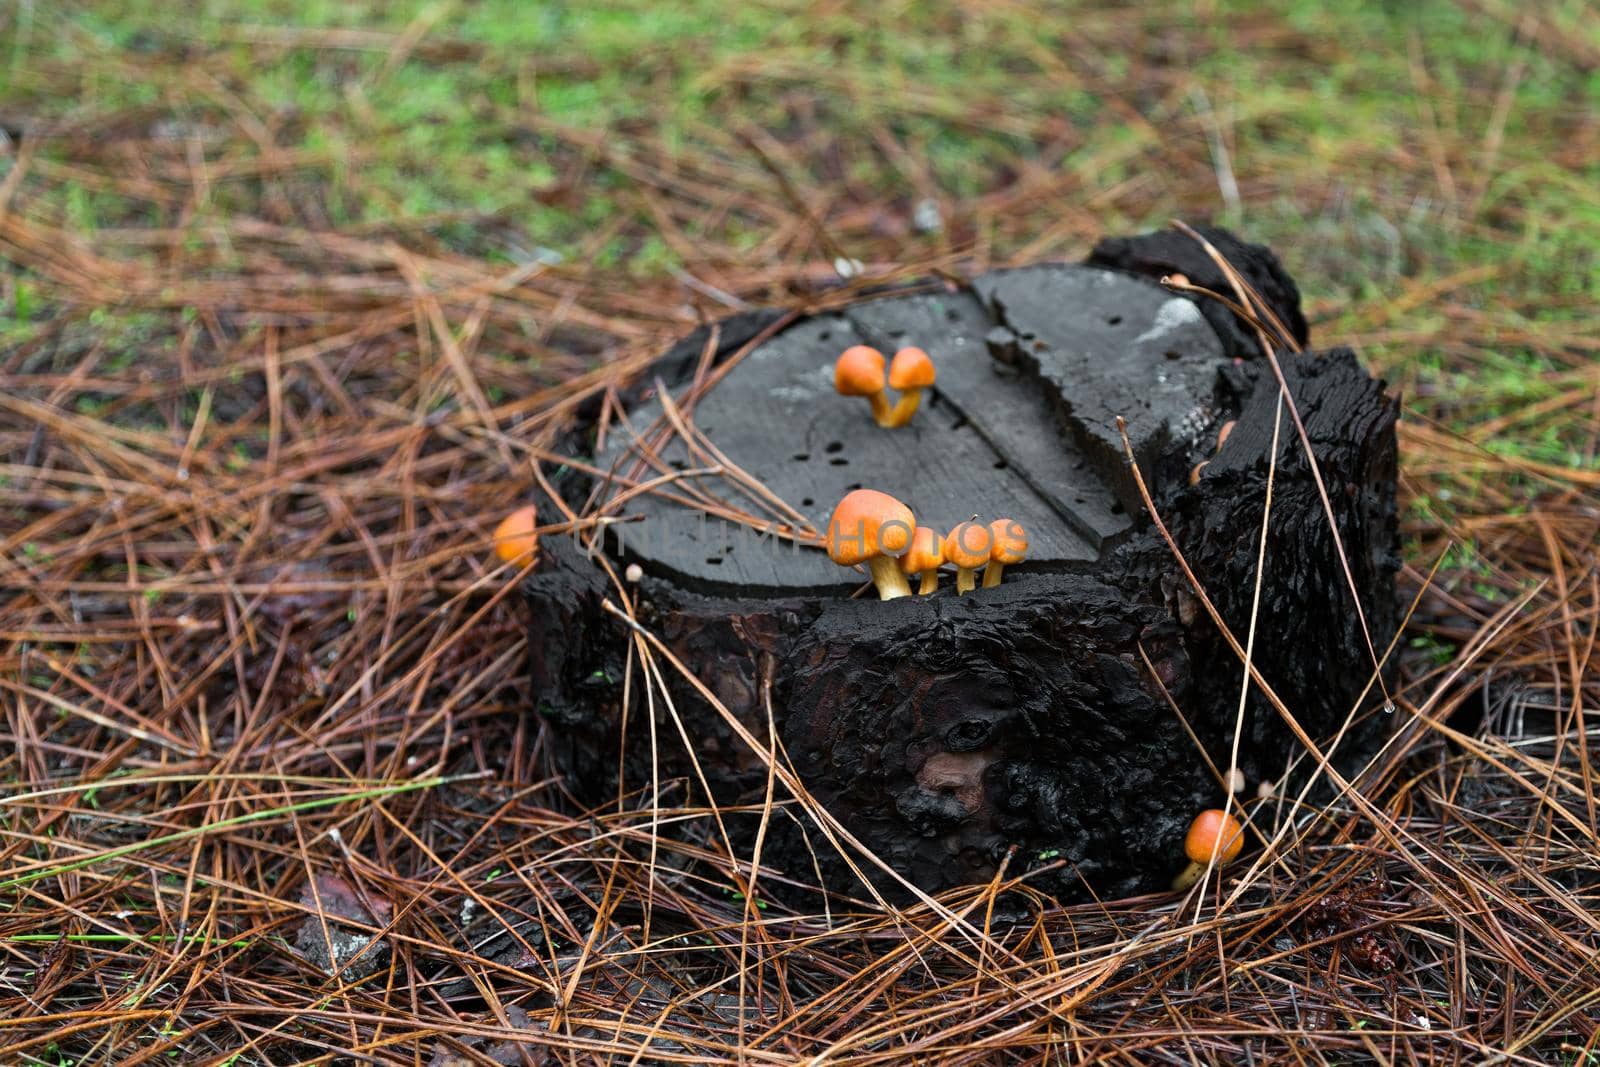 Small poisonous inedible mushrooms on a stump among dry needles in the forest.